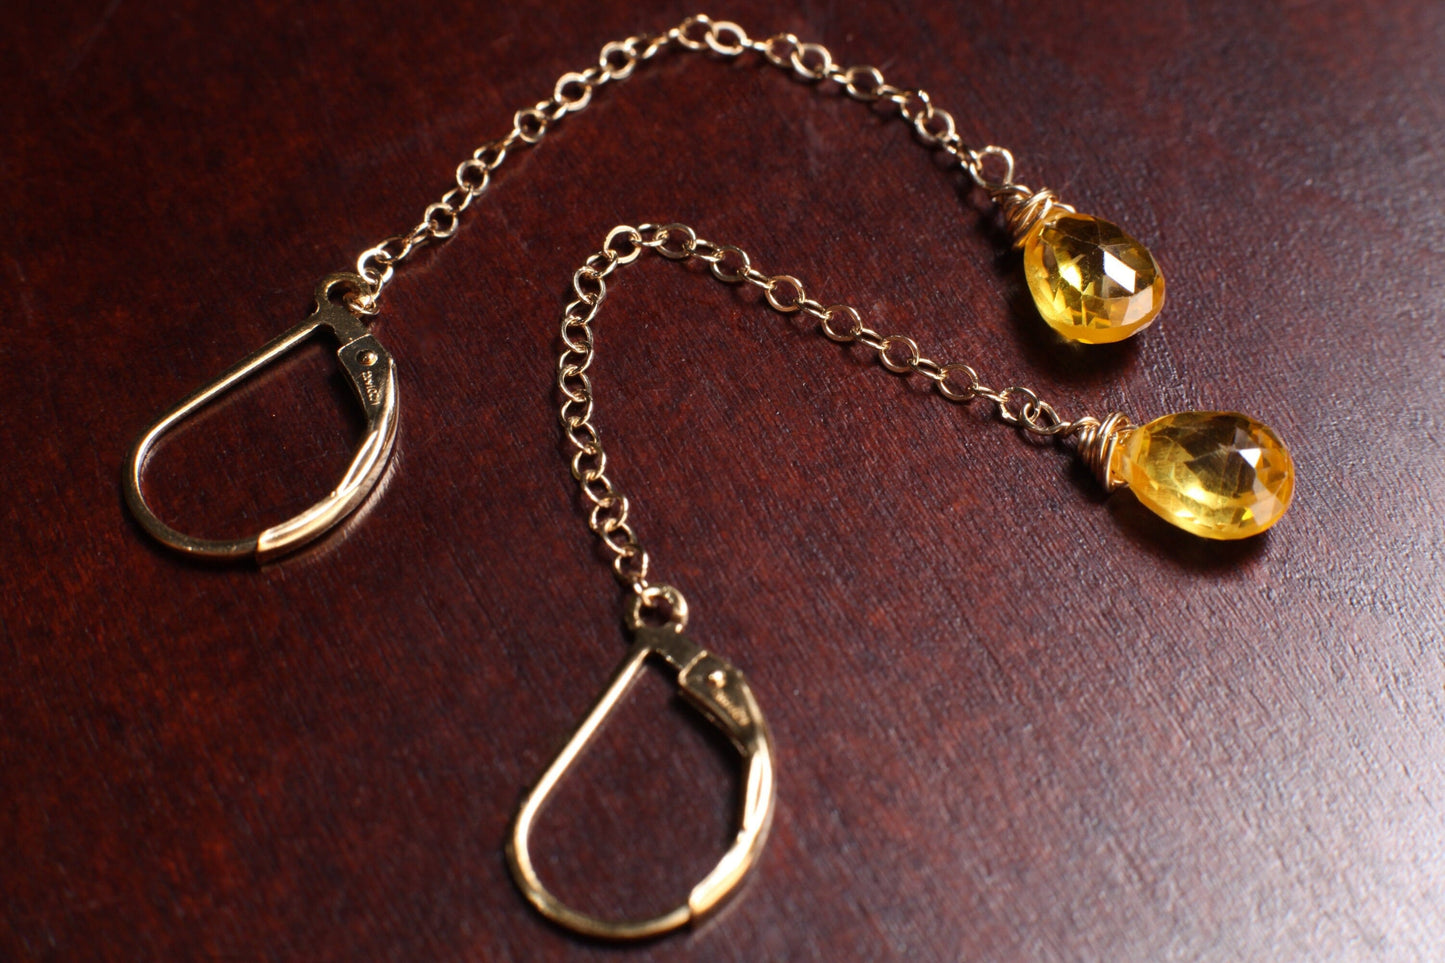 Yellow Citrine 6x9mm Wire Wrapped Teardrop Briolette with 14K Gold Filled Chain and Leverback Earrings, Gemstone Handmade Gift for Her